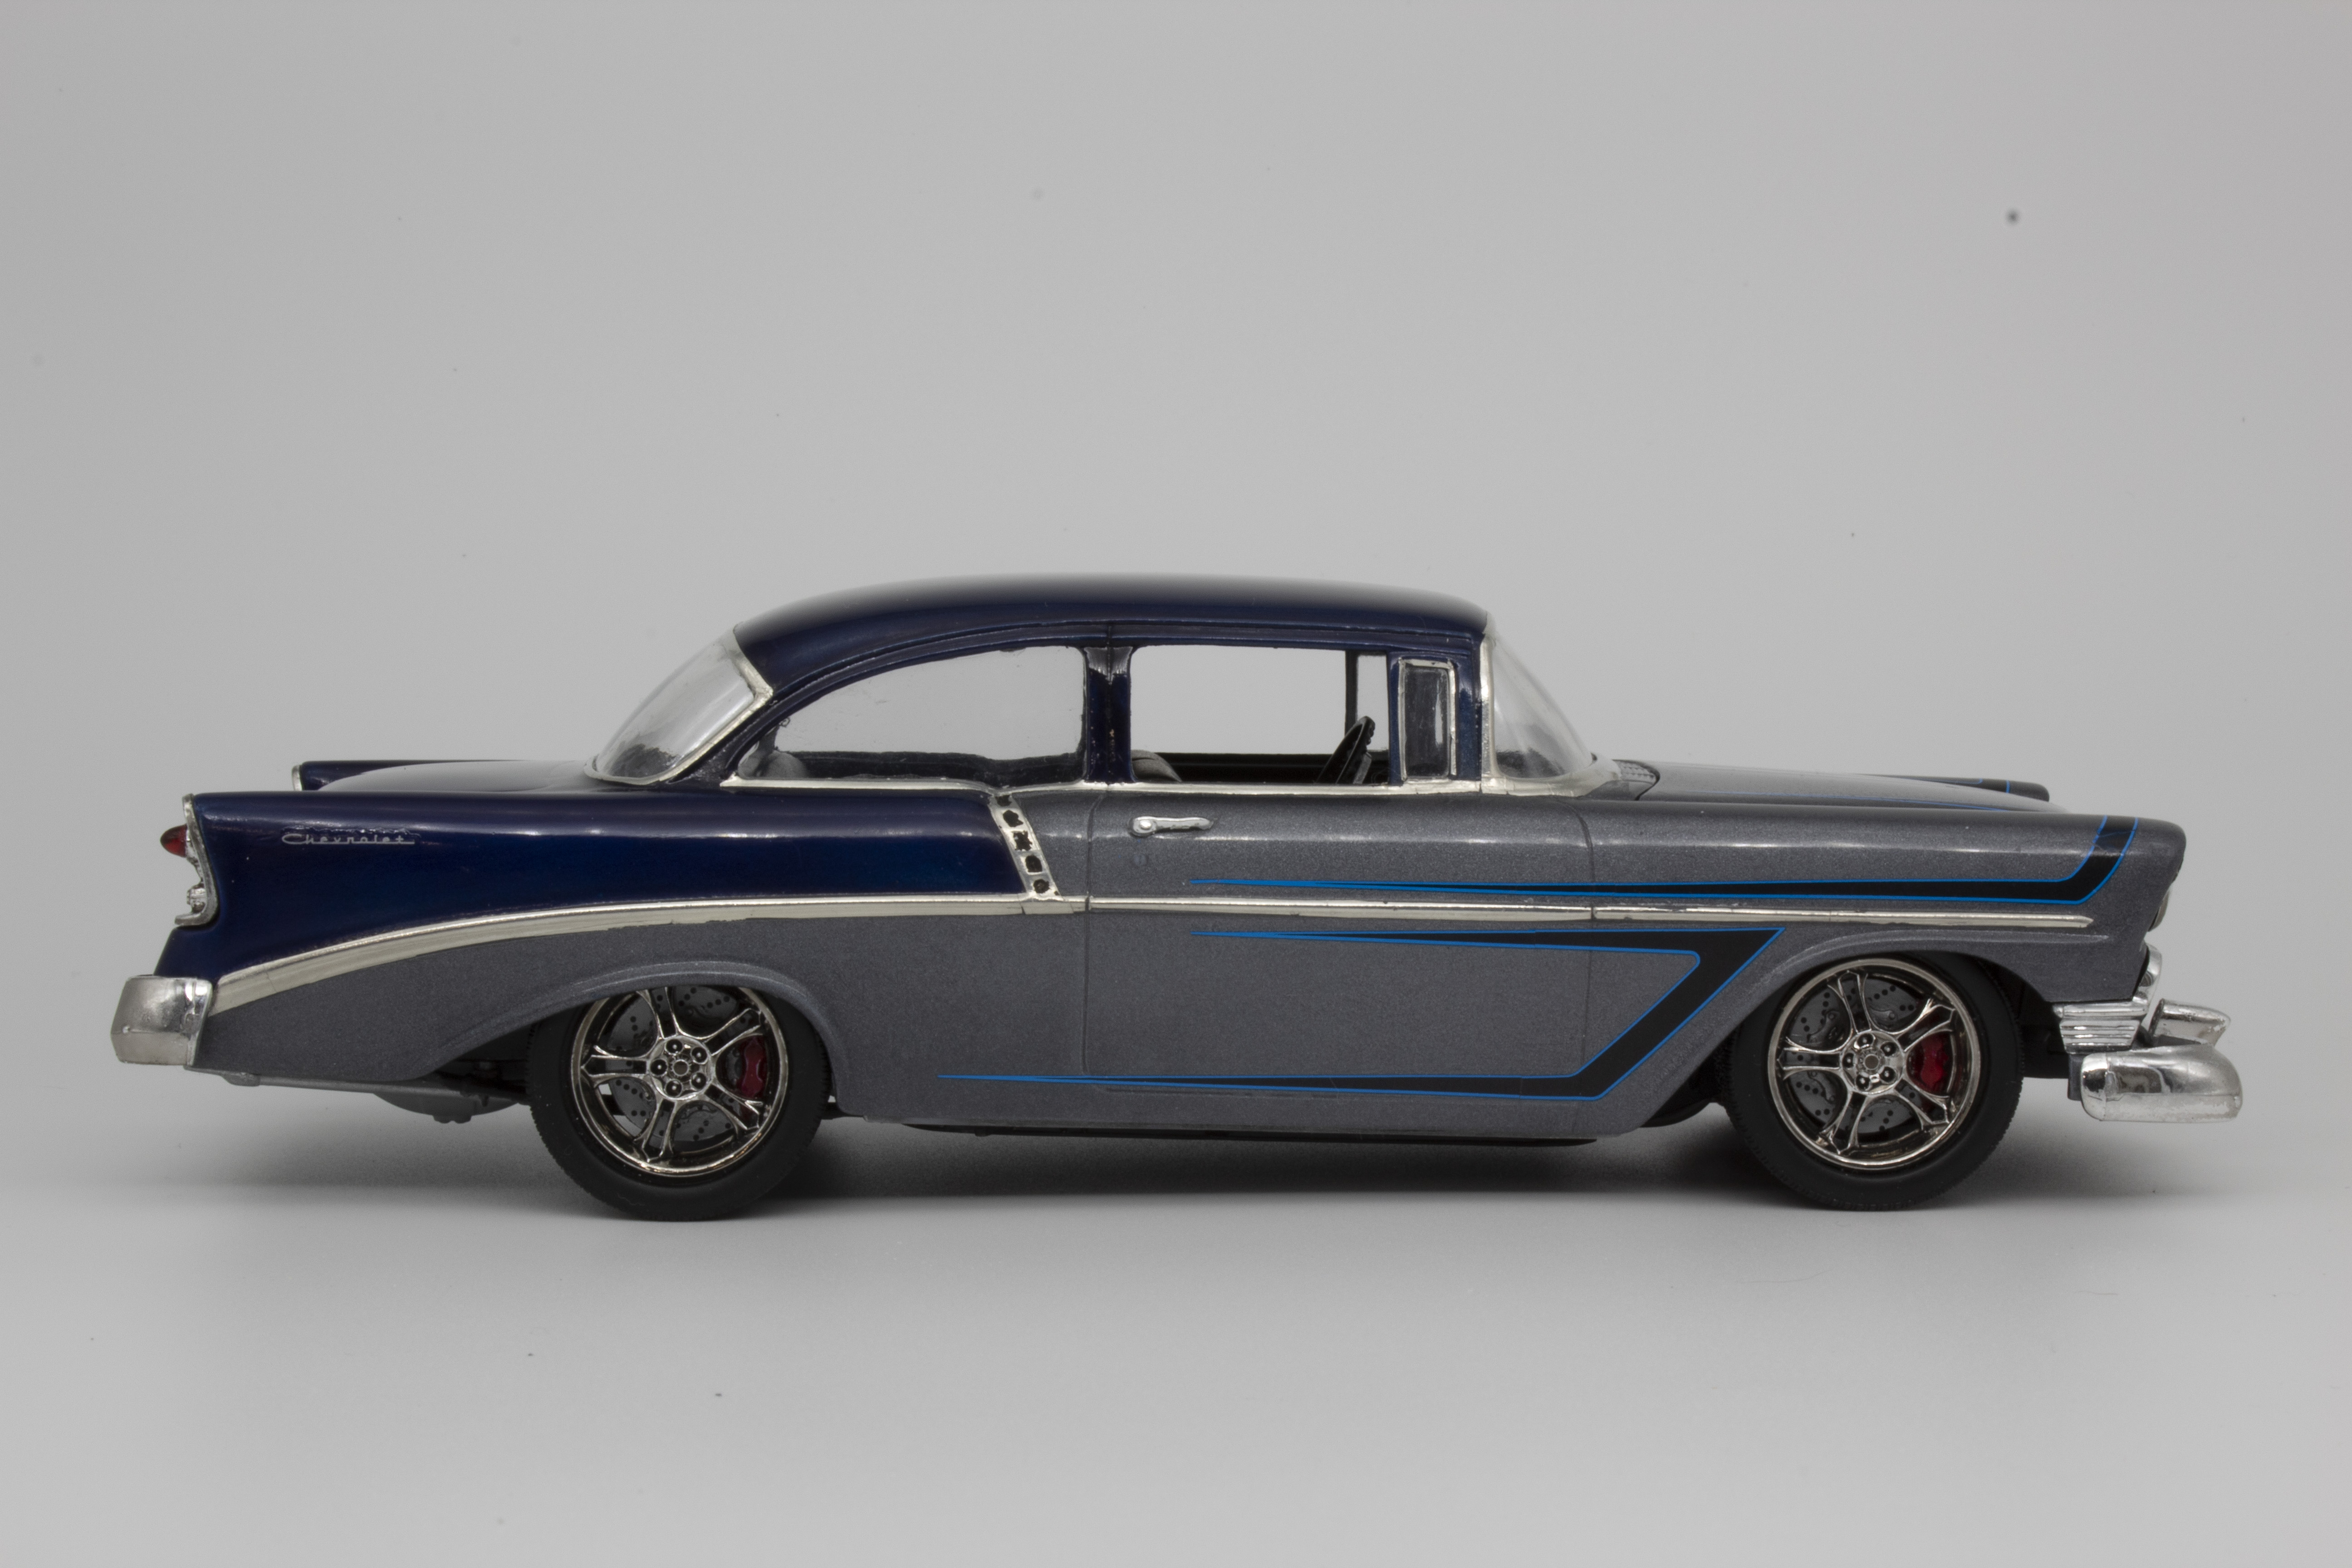 Build review of the Revell 1956 Chevy Delray 2 'n 1 scale model